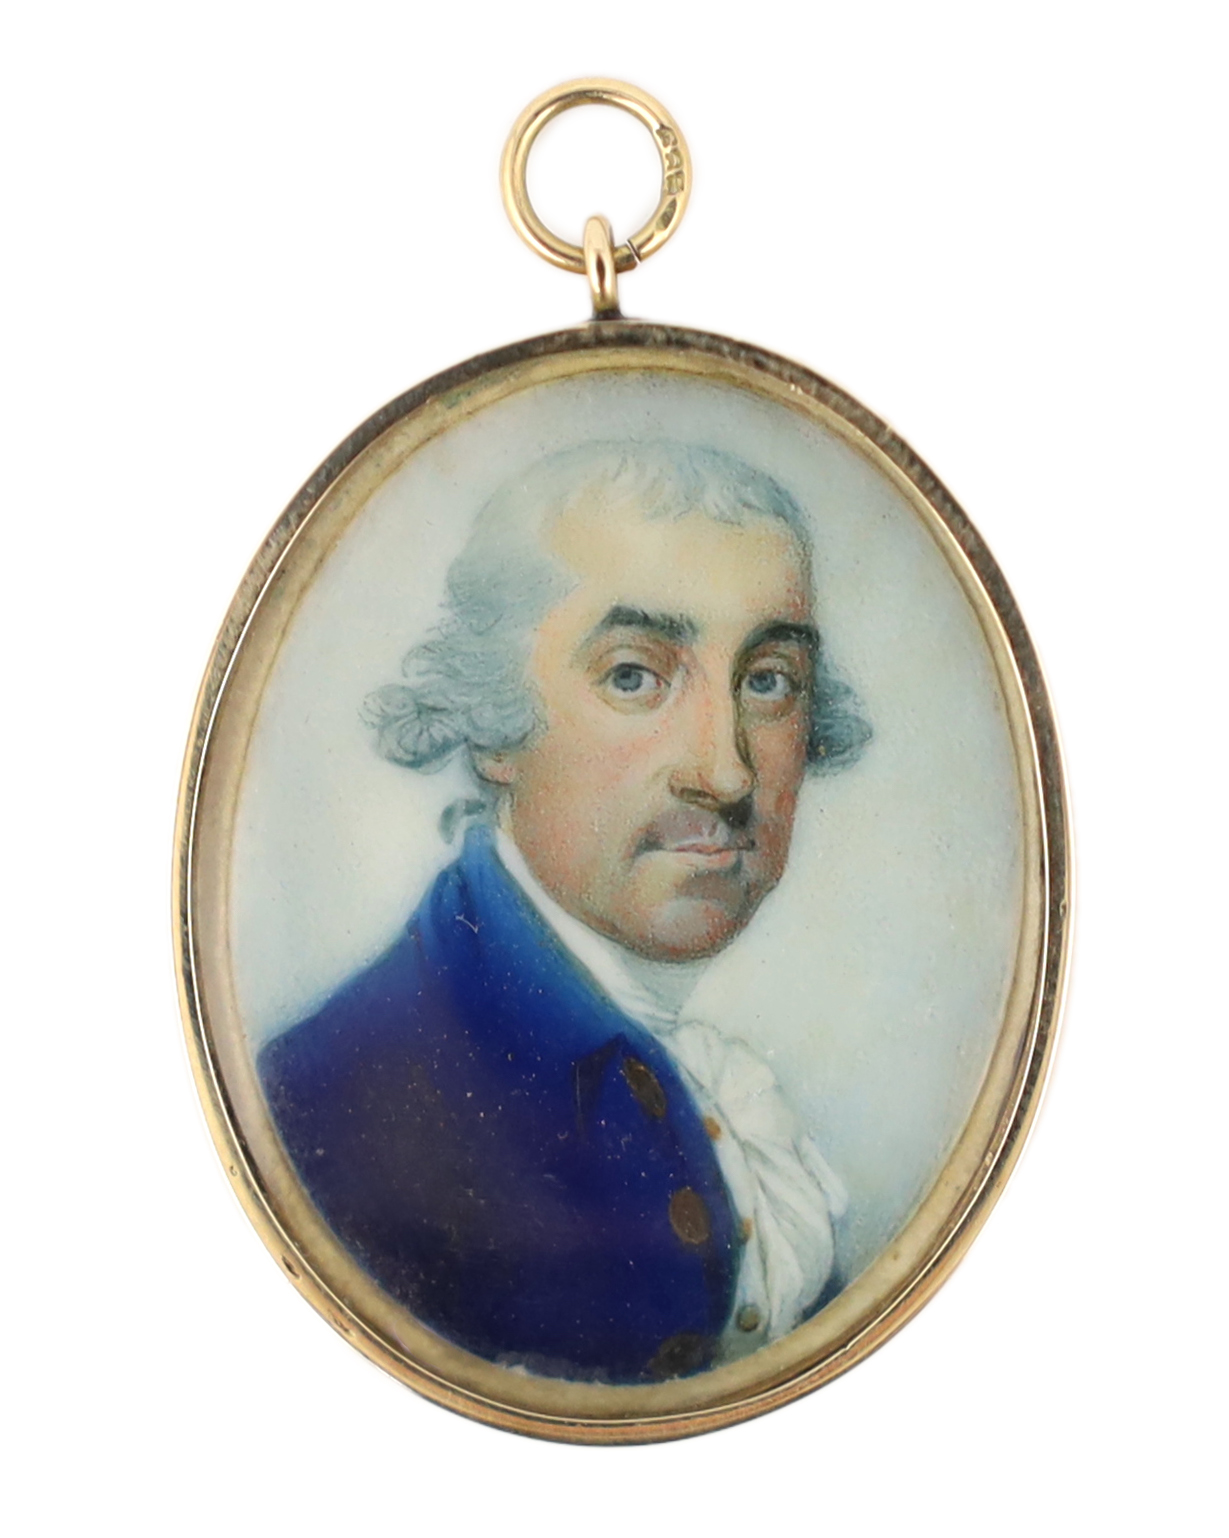 Jeremiah Meyer, R.A. (Anglo-German, 1735-1789), Portrait miniature of a gentleman, watercolour on ivory, 3.2 x 2.4cm. CITES Submission reference MWYHWRR2